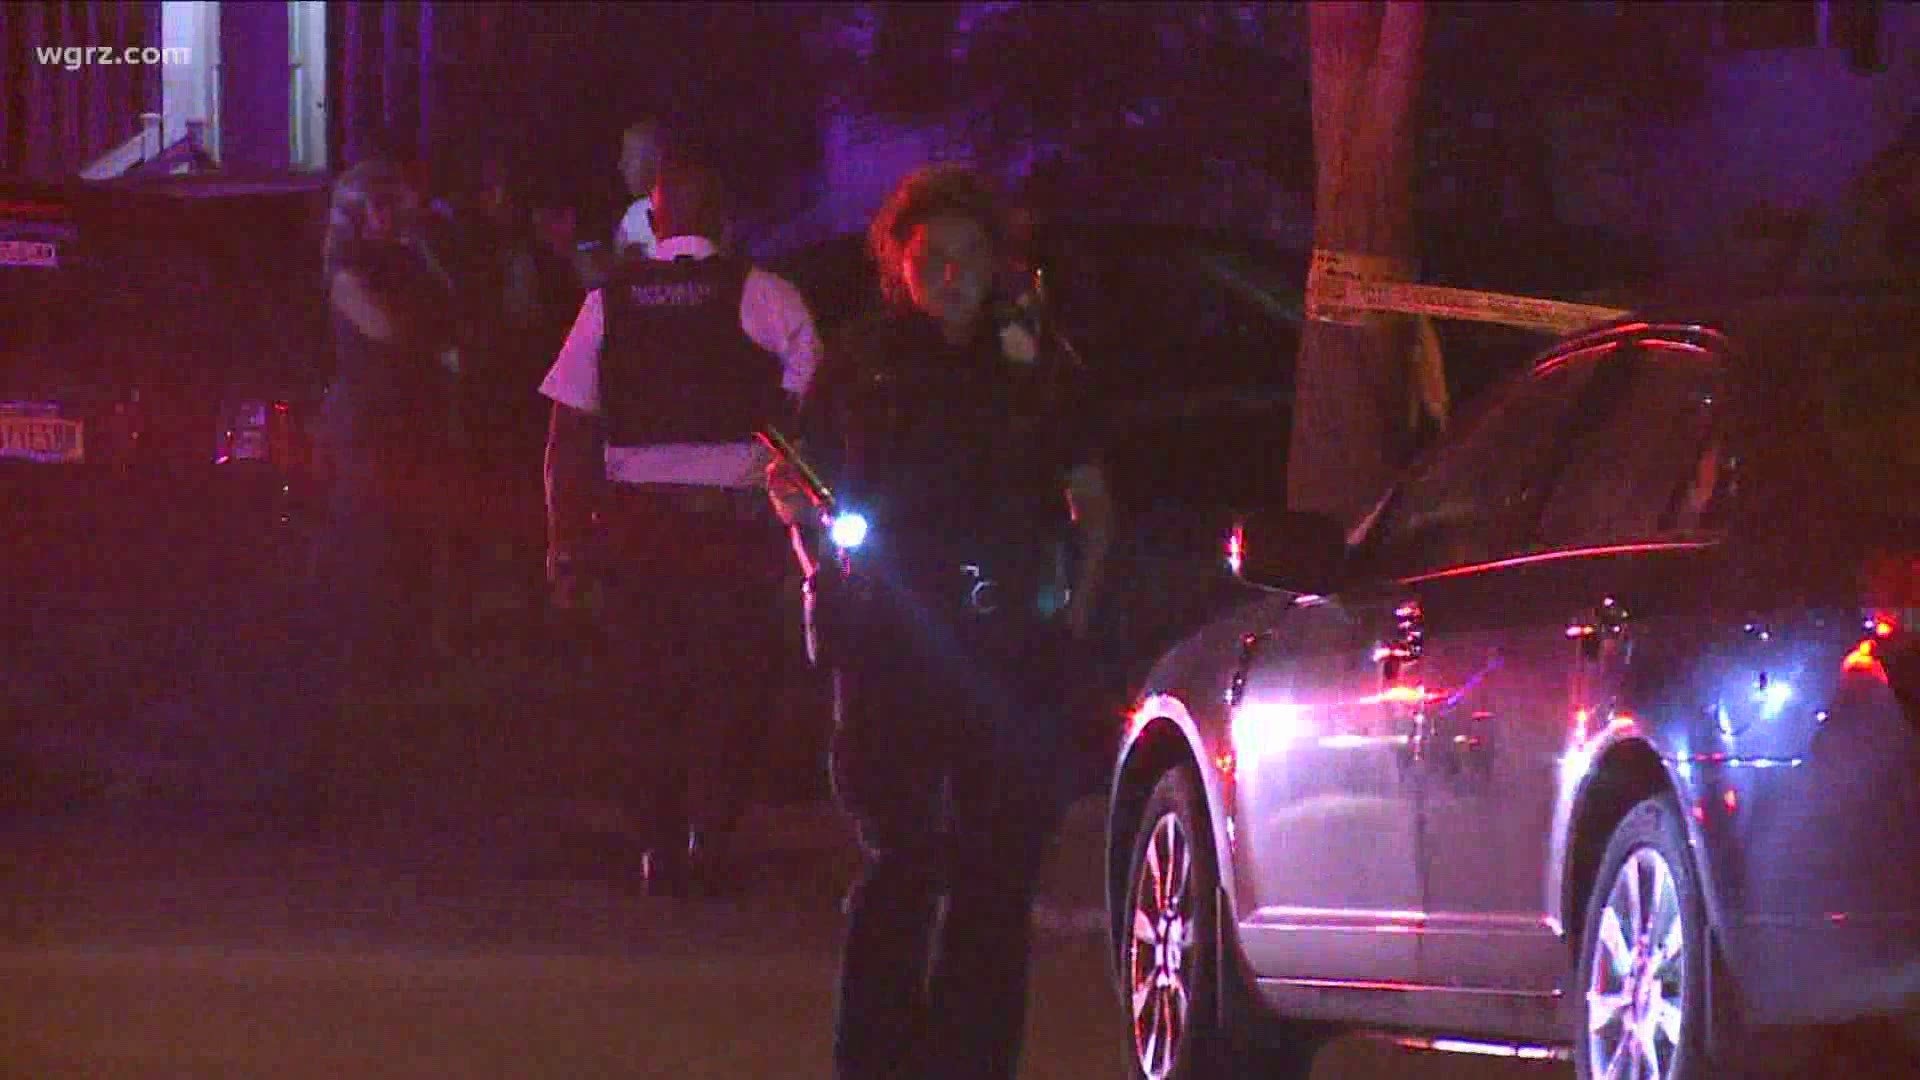 Detectives say three men were shot during some type of party or gathering. According to a city spokesperson, a 29-year-old man died at the scene.